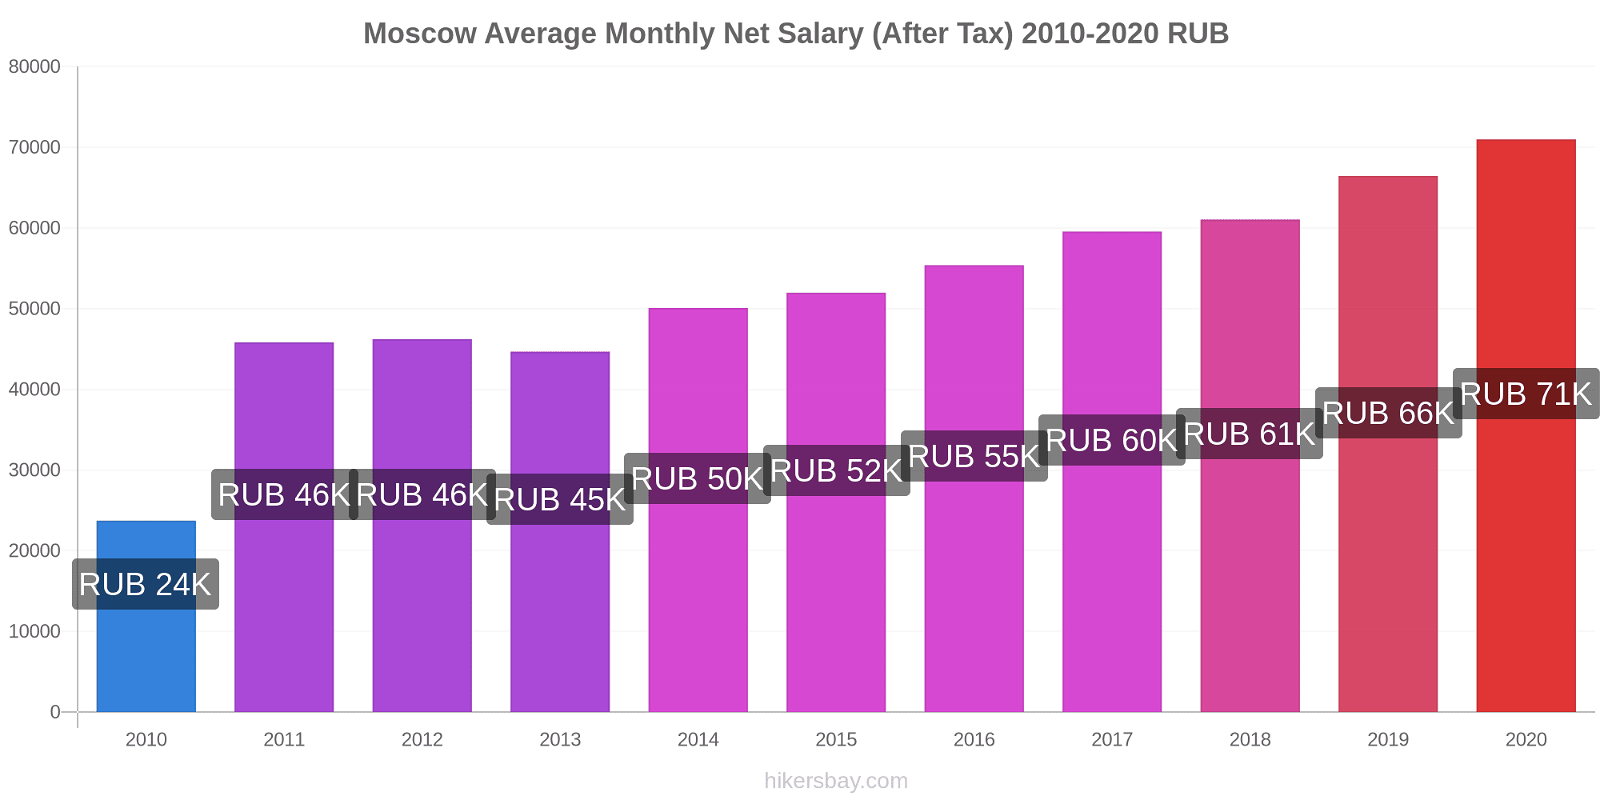 Moscow price changes Average Monthly Net Salary (After Tax) hikersbay.com